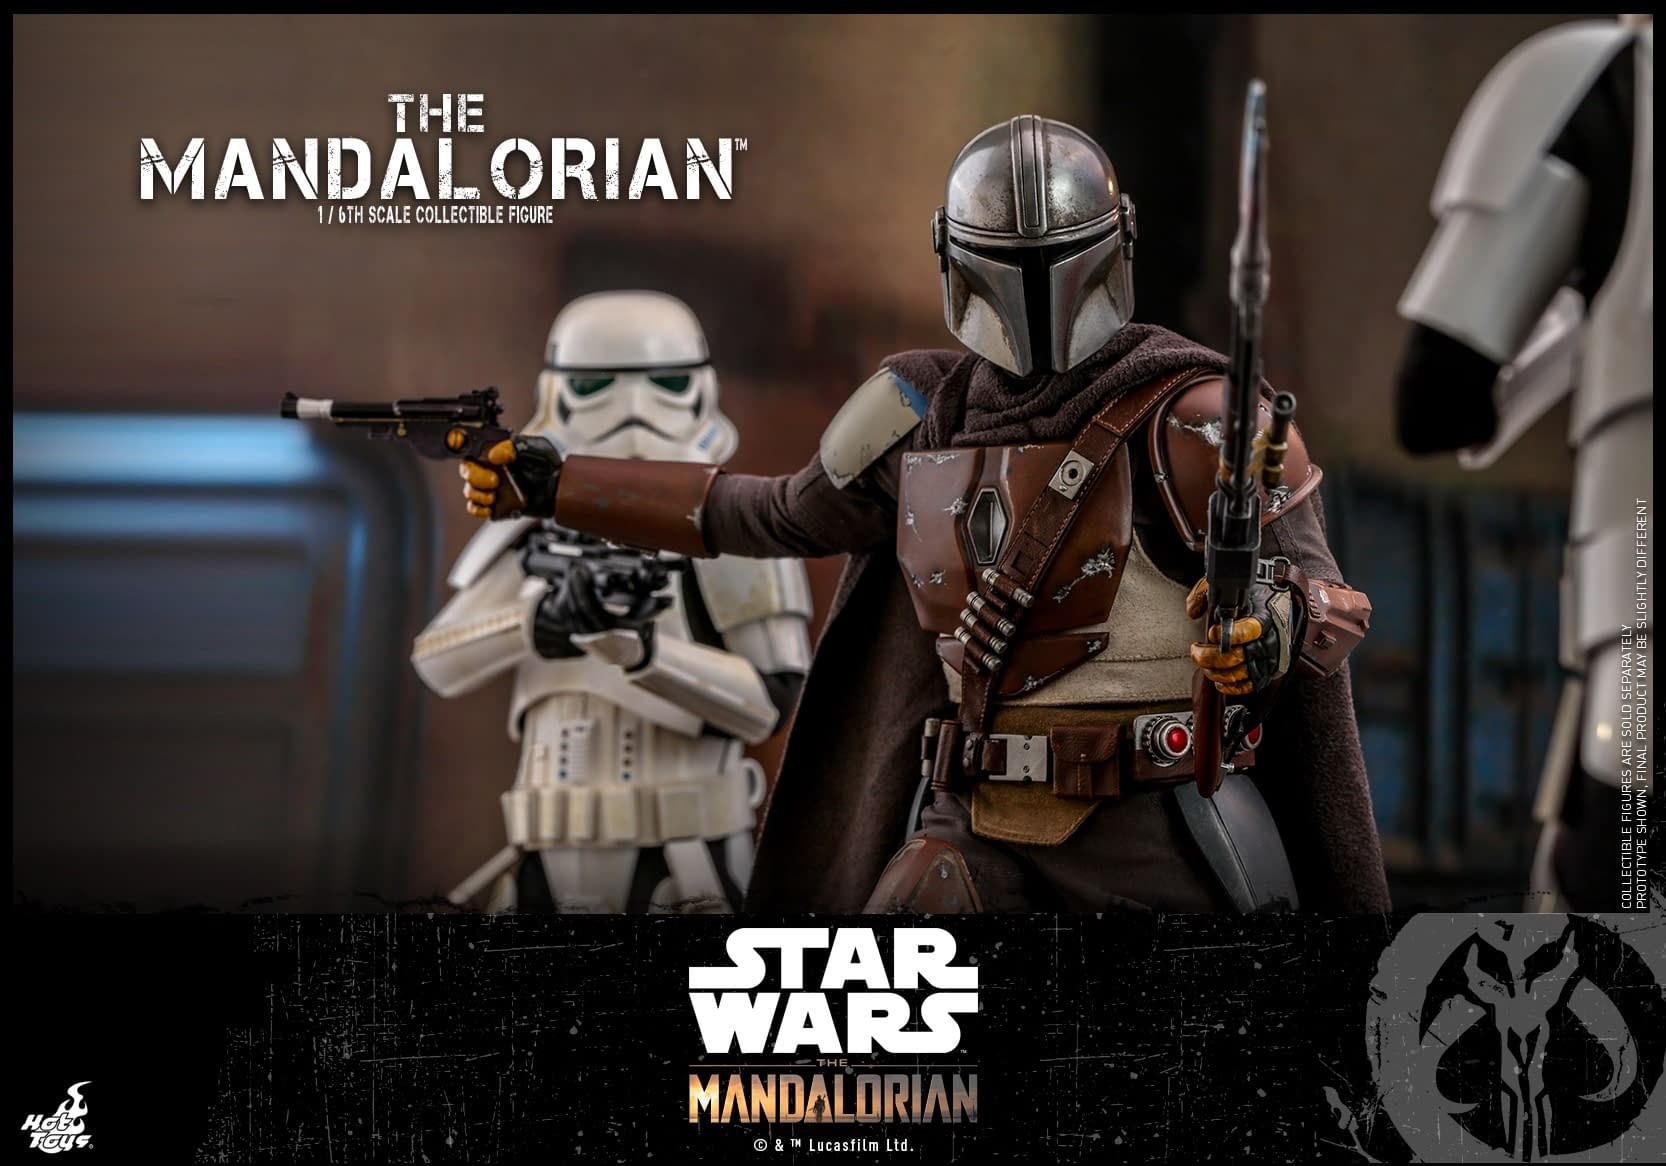 The Mandalorian Wants your Credits with New Hot Toys Figure